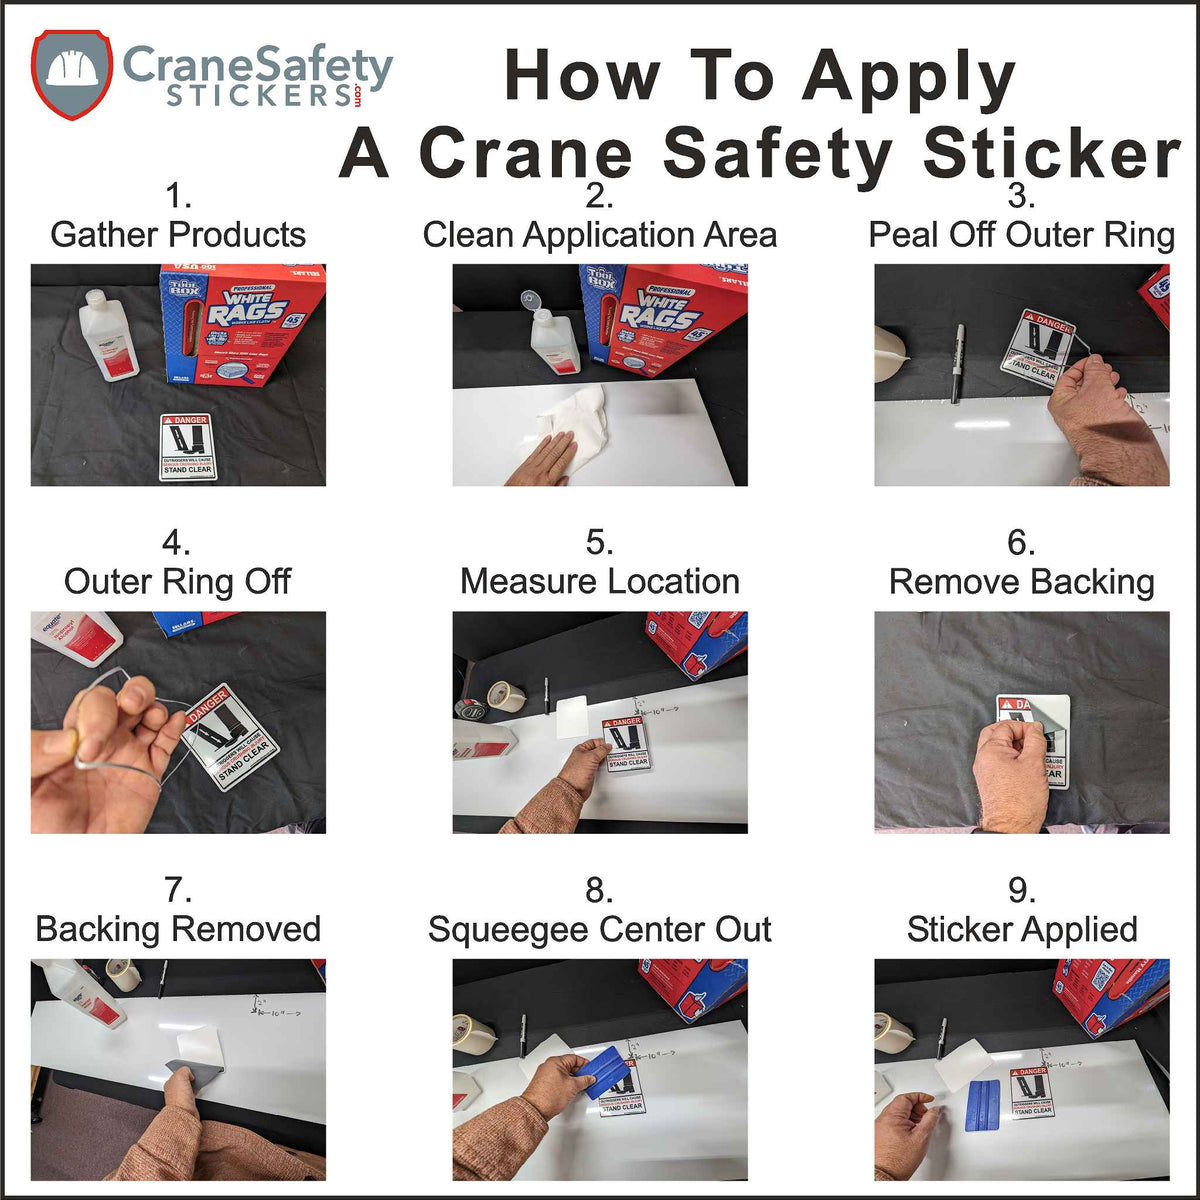 Directions on how to apply our Crane Safety sticker Printed with, Position crane on firm surface. Extend outriggers and make sure crane is level.